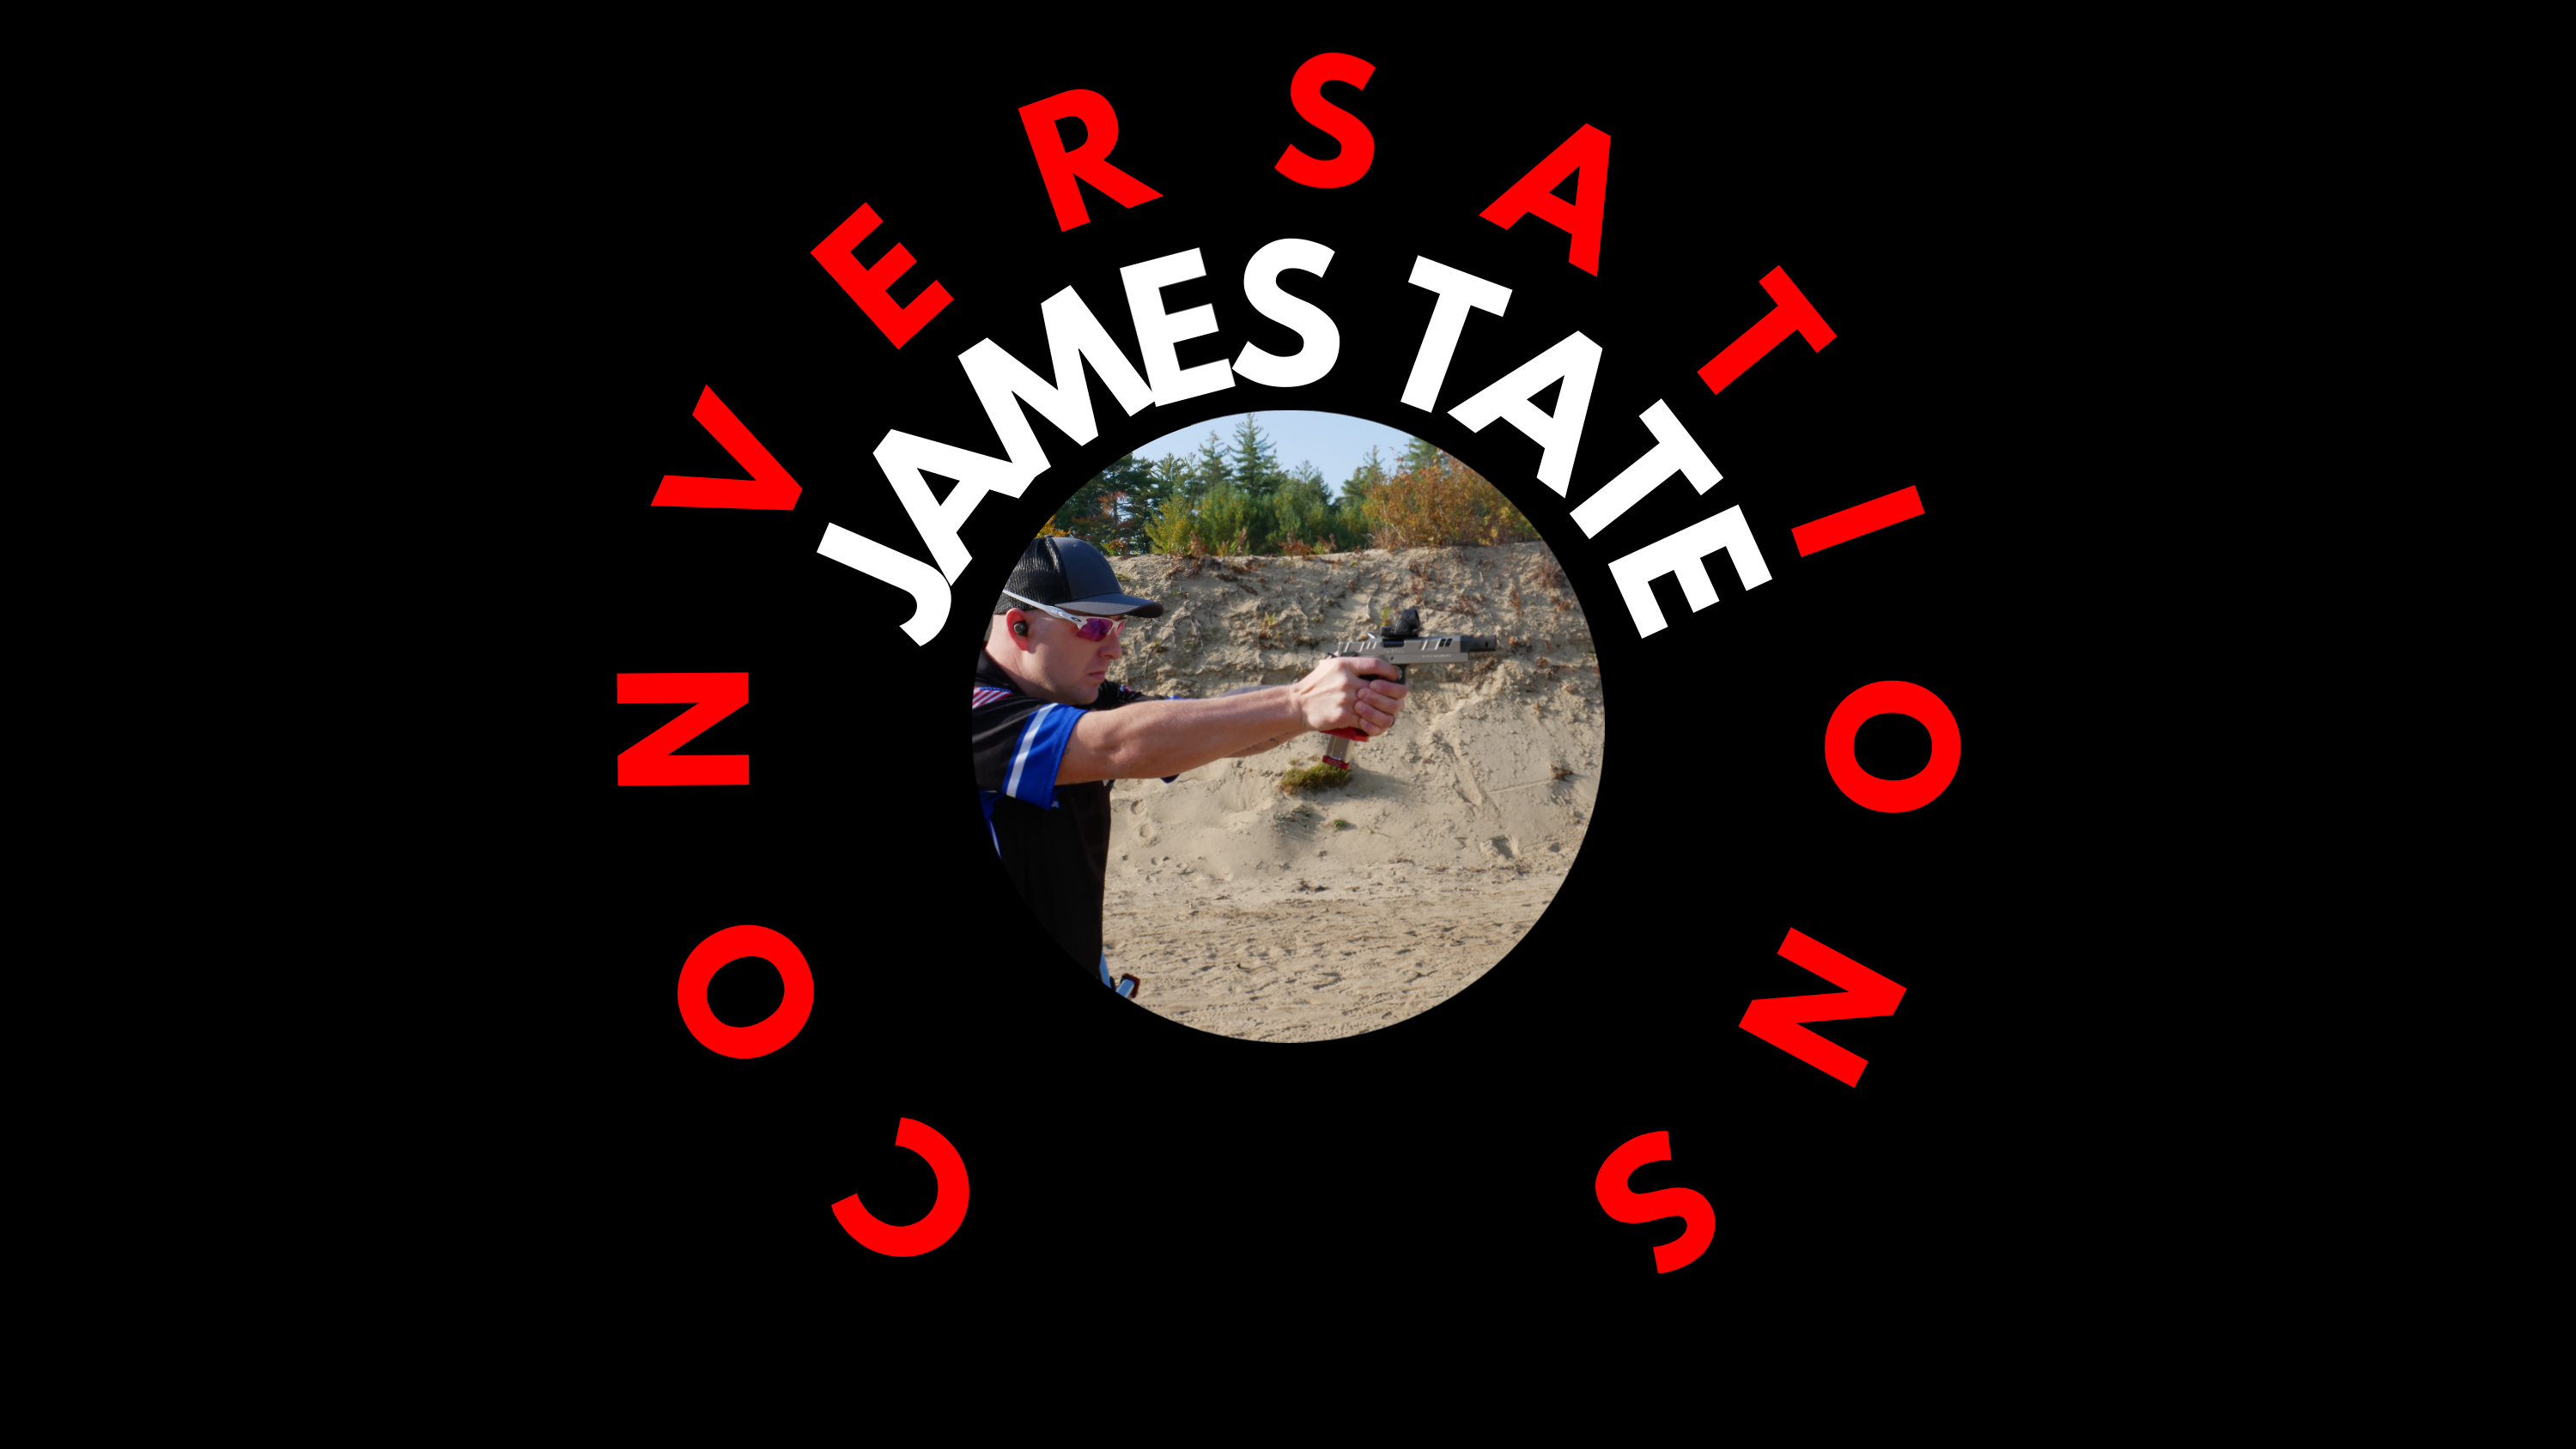 EP: 45 James Tate, Uspsa Open Class and Servicing the Deadliest Fighter on the Planet